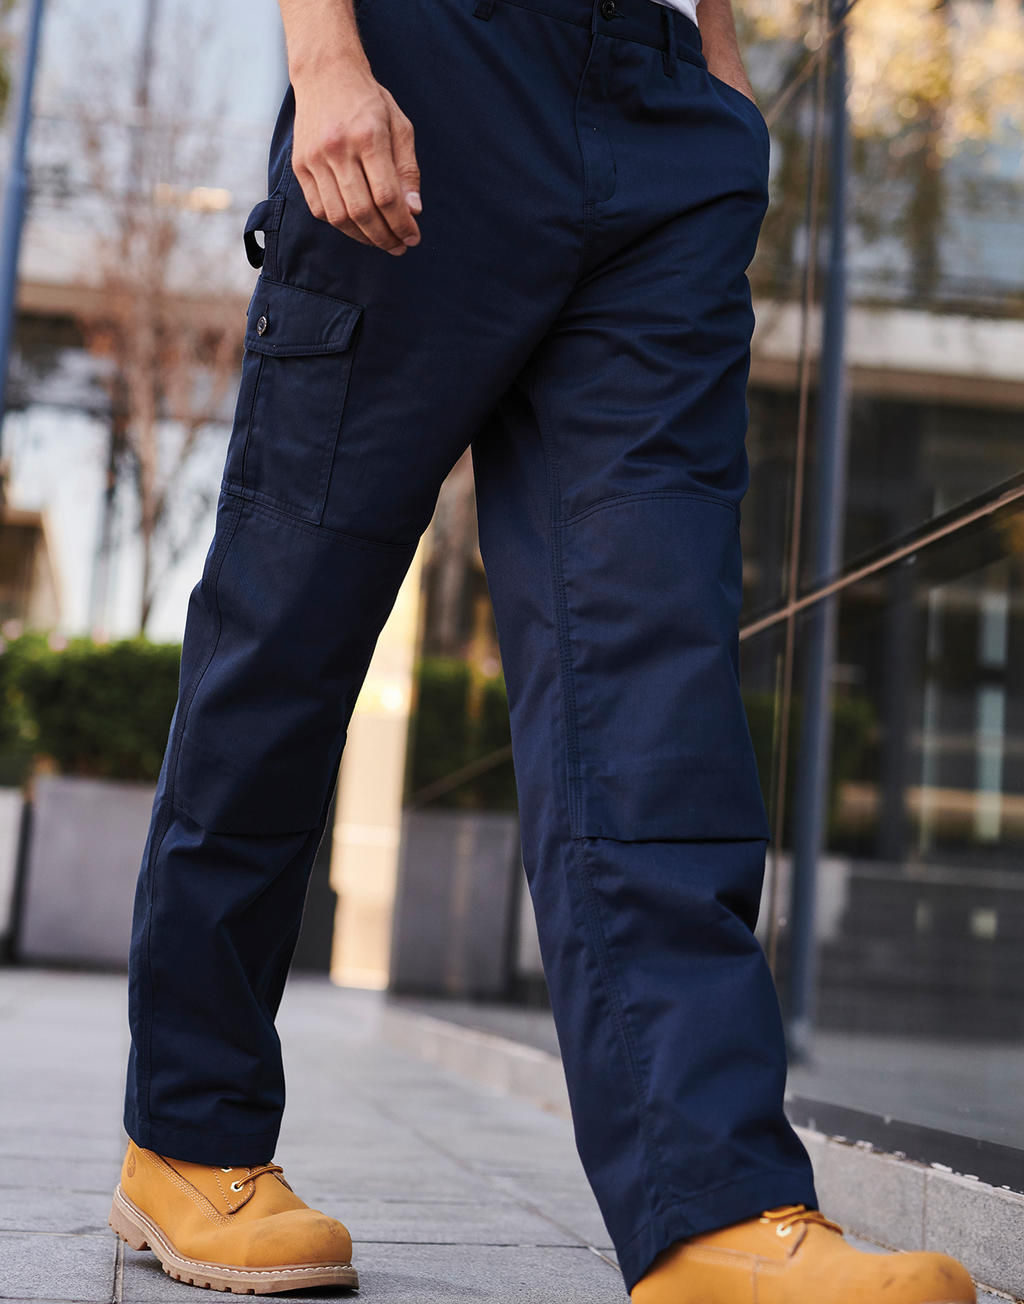  Pro Cargo Trousers (Long) in Farbe Black